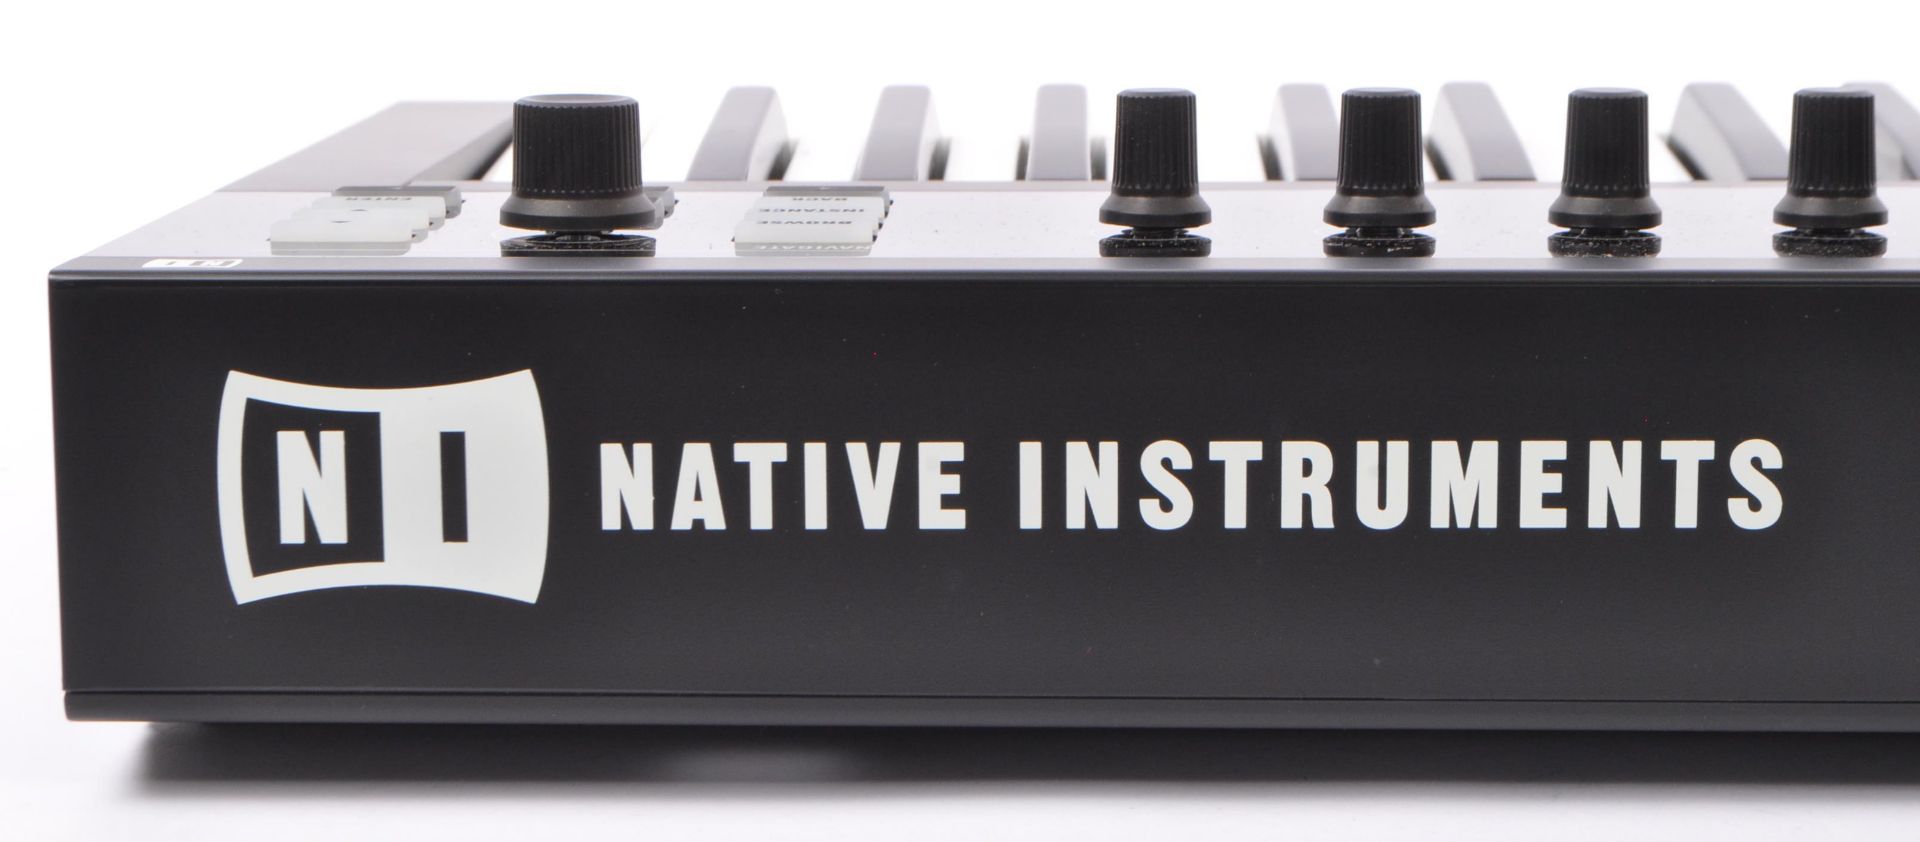 CONTEMPORARY KOMPLETE CONTROL NATIVE INSTRUMENTS KEYBOARD - Image 7 of 8